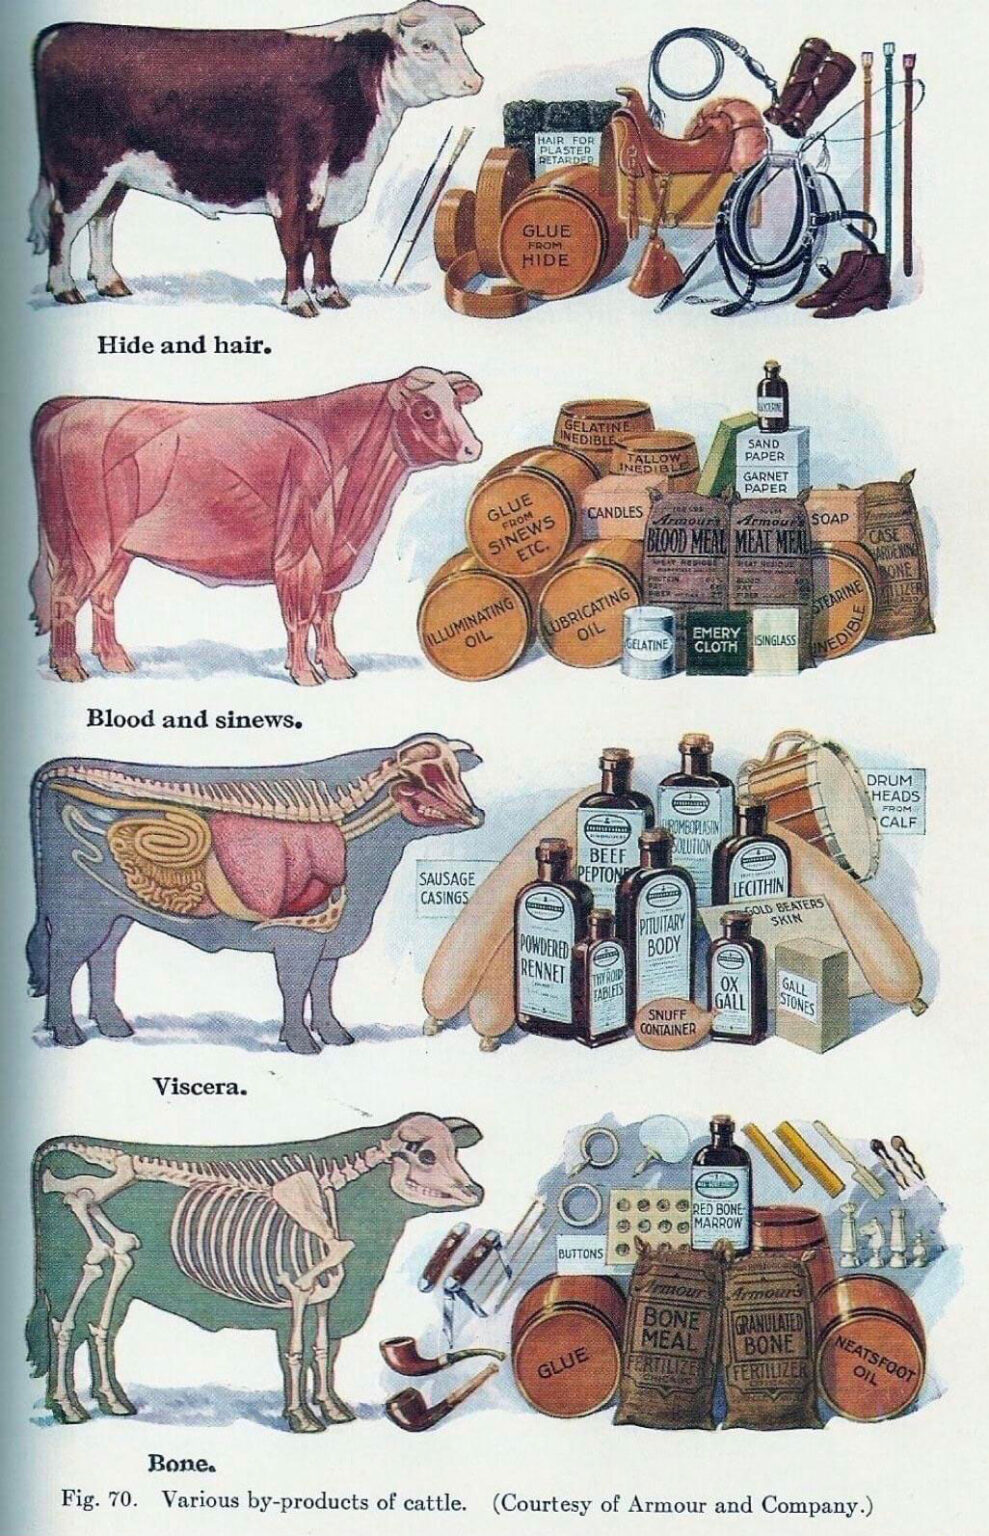 Animal By-products